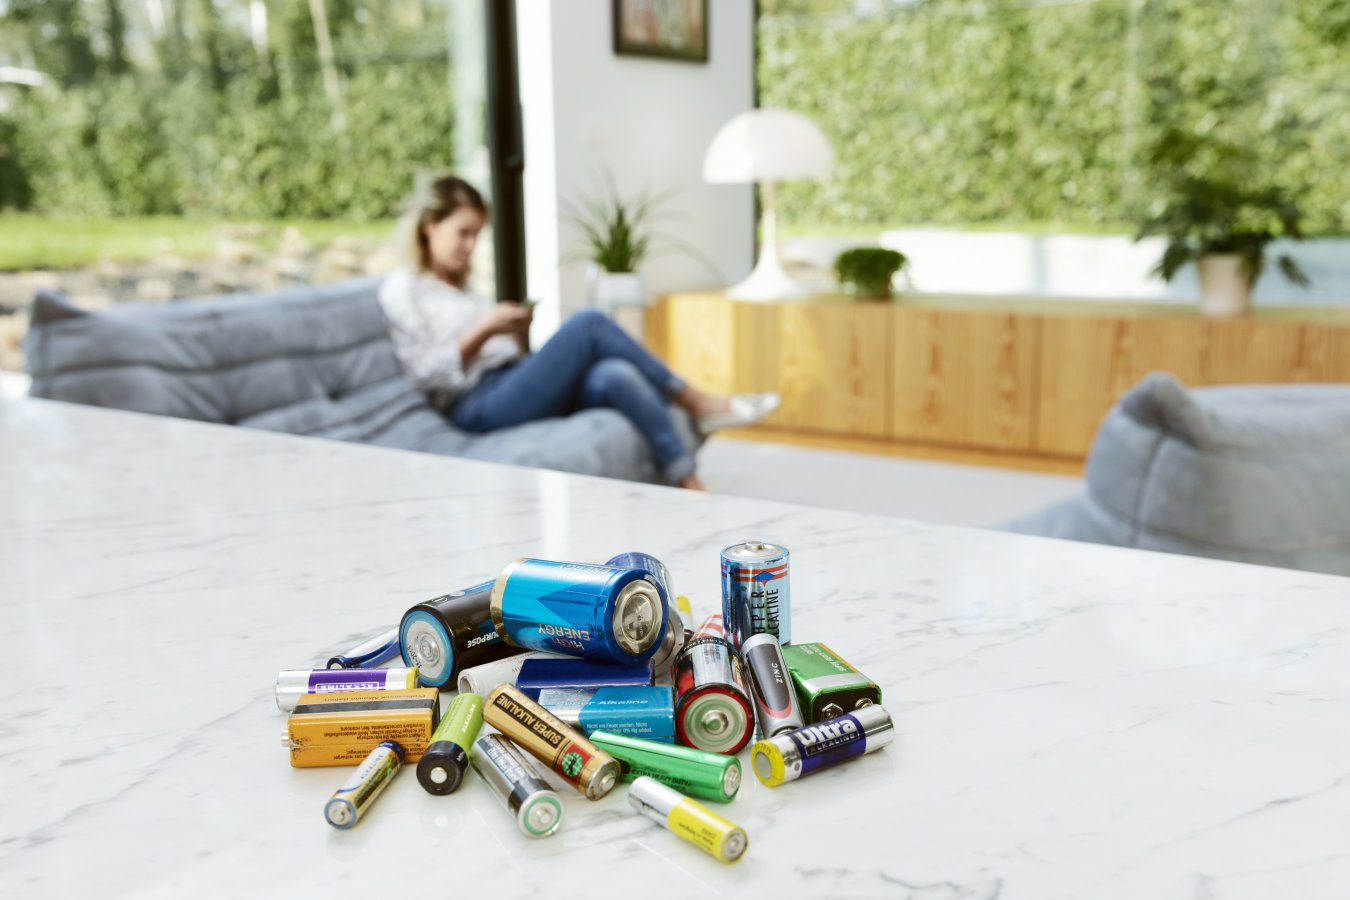 Study: You Have 4 Times More Batteries in Your Home Than You Think You Do